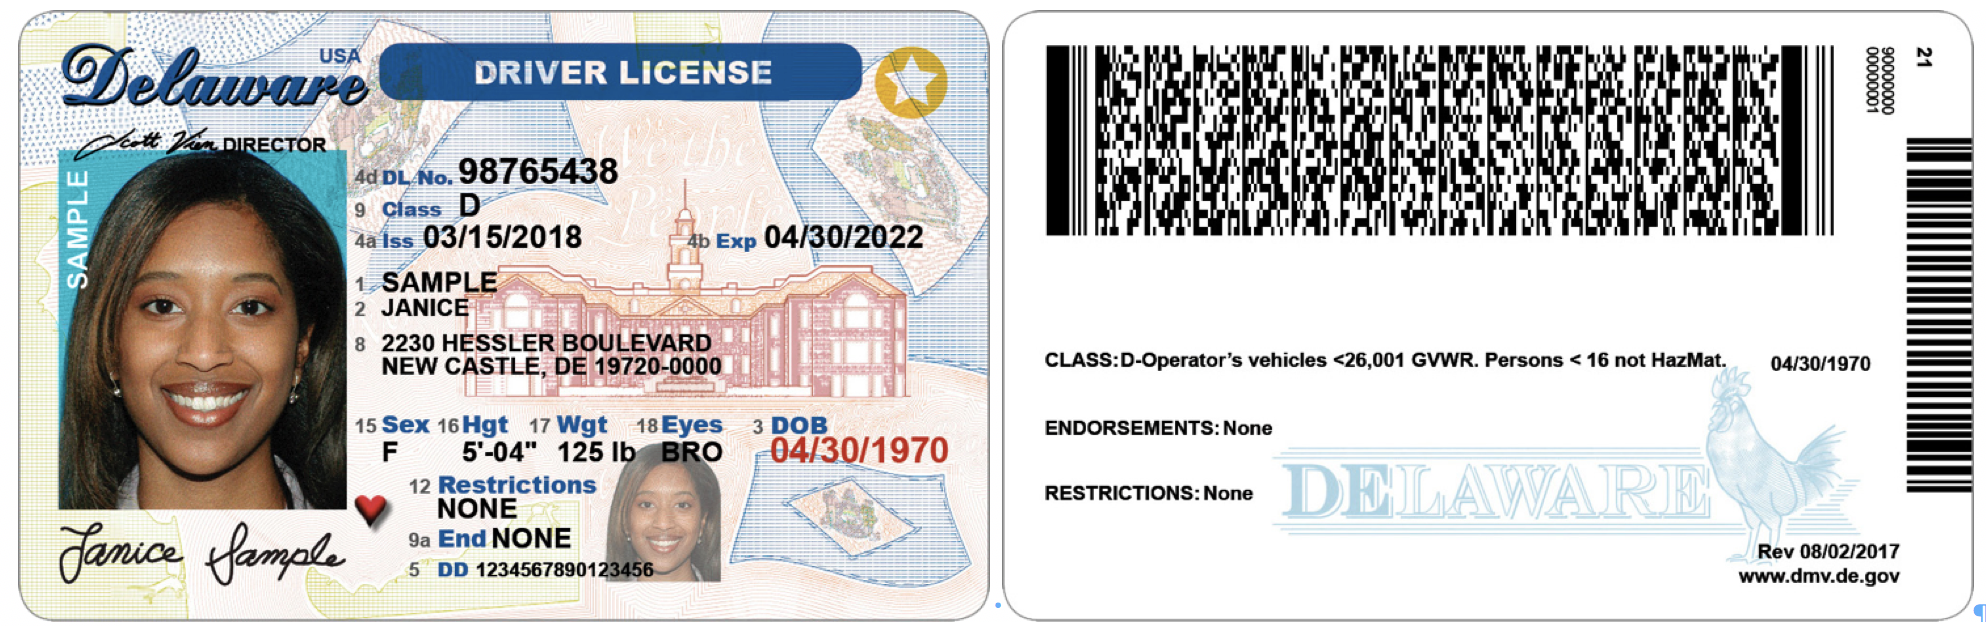 Delaware aims to combat ID fraud with new driver's licenses